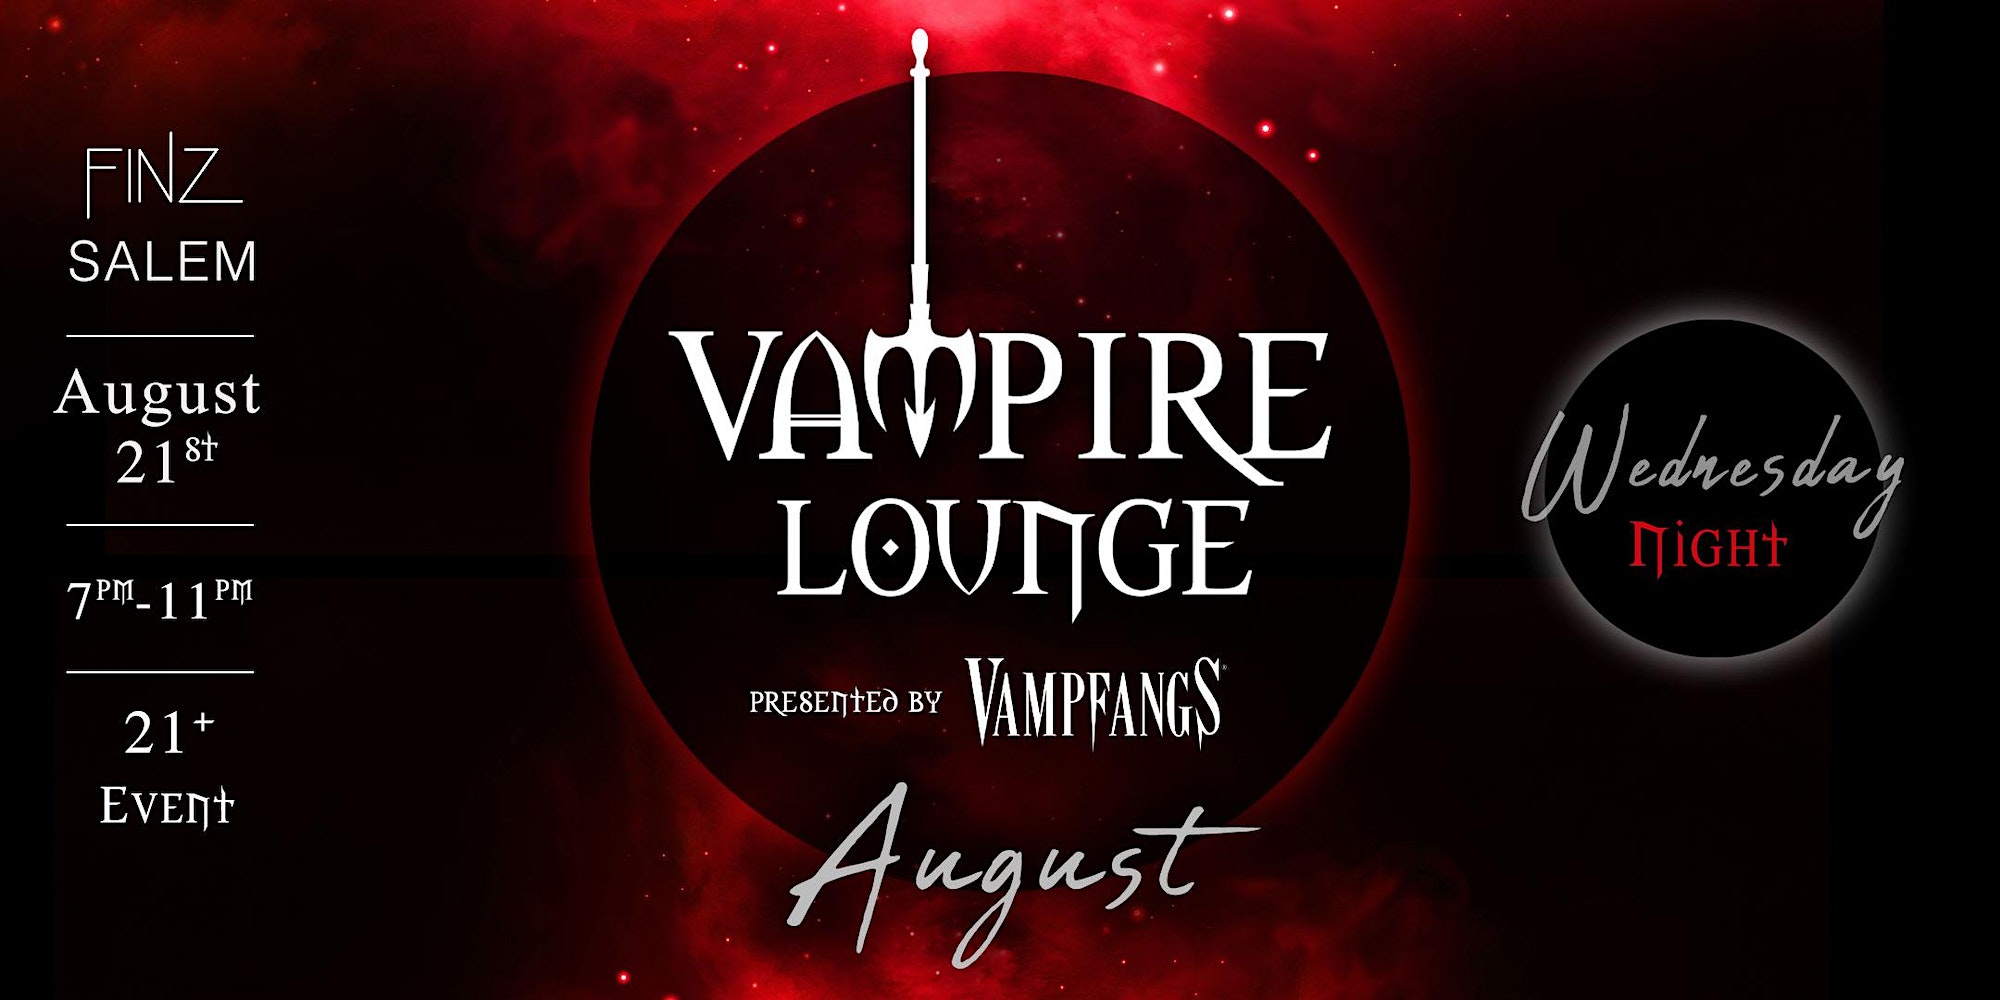 Experience the allure of our vampire lounge encapsulated in an eye-catching poster featuring a rich crimson backdrop.